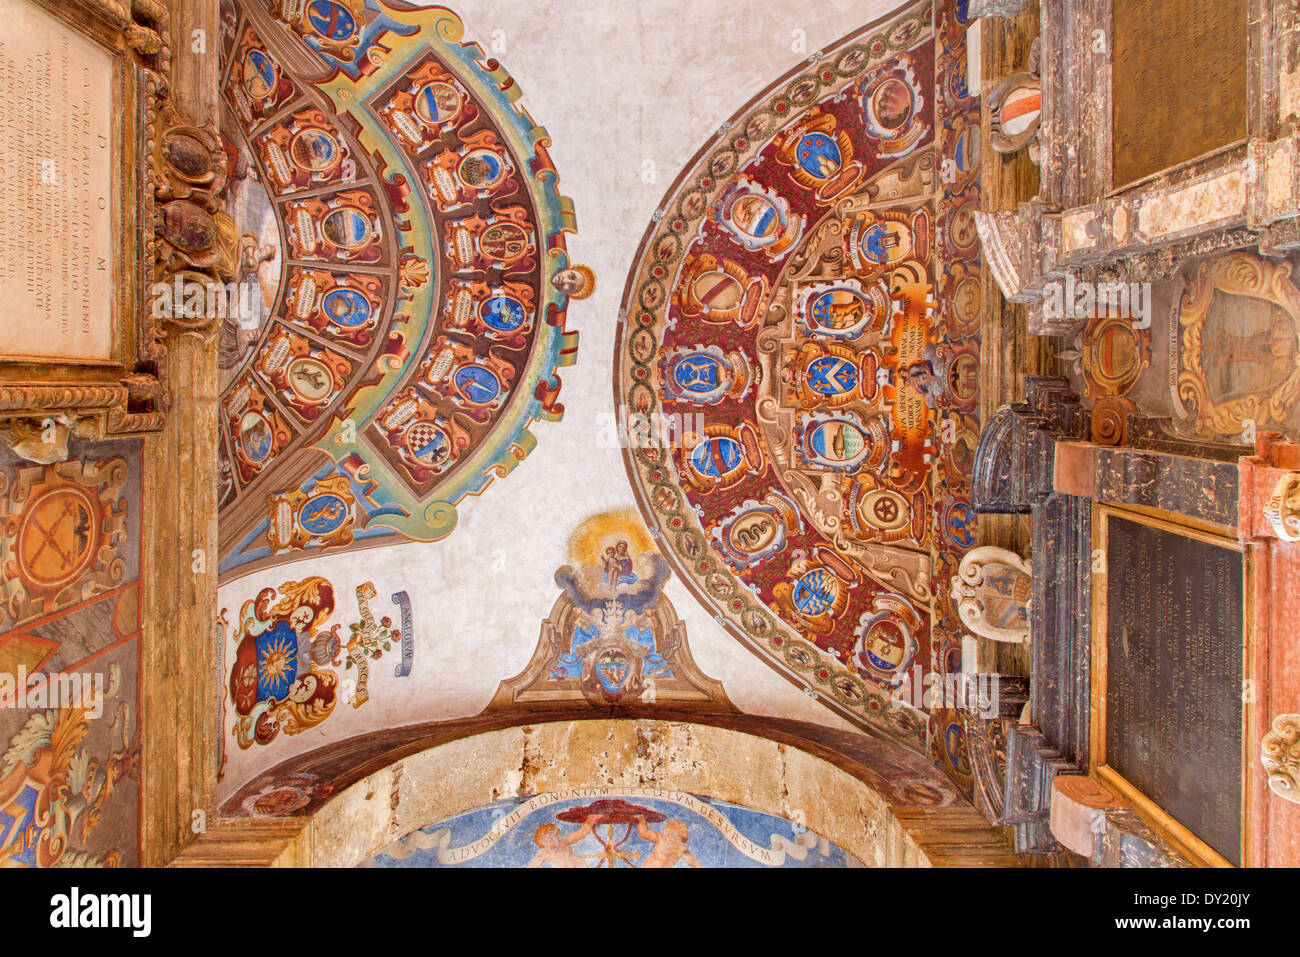 BOLOGNA, ITALY - MARCH 15, 2014: Ceiling and walls of entry to external atrium of Archiginnasio. Stock Photo